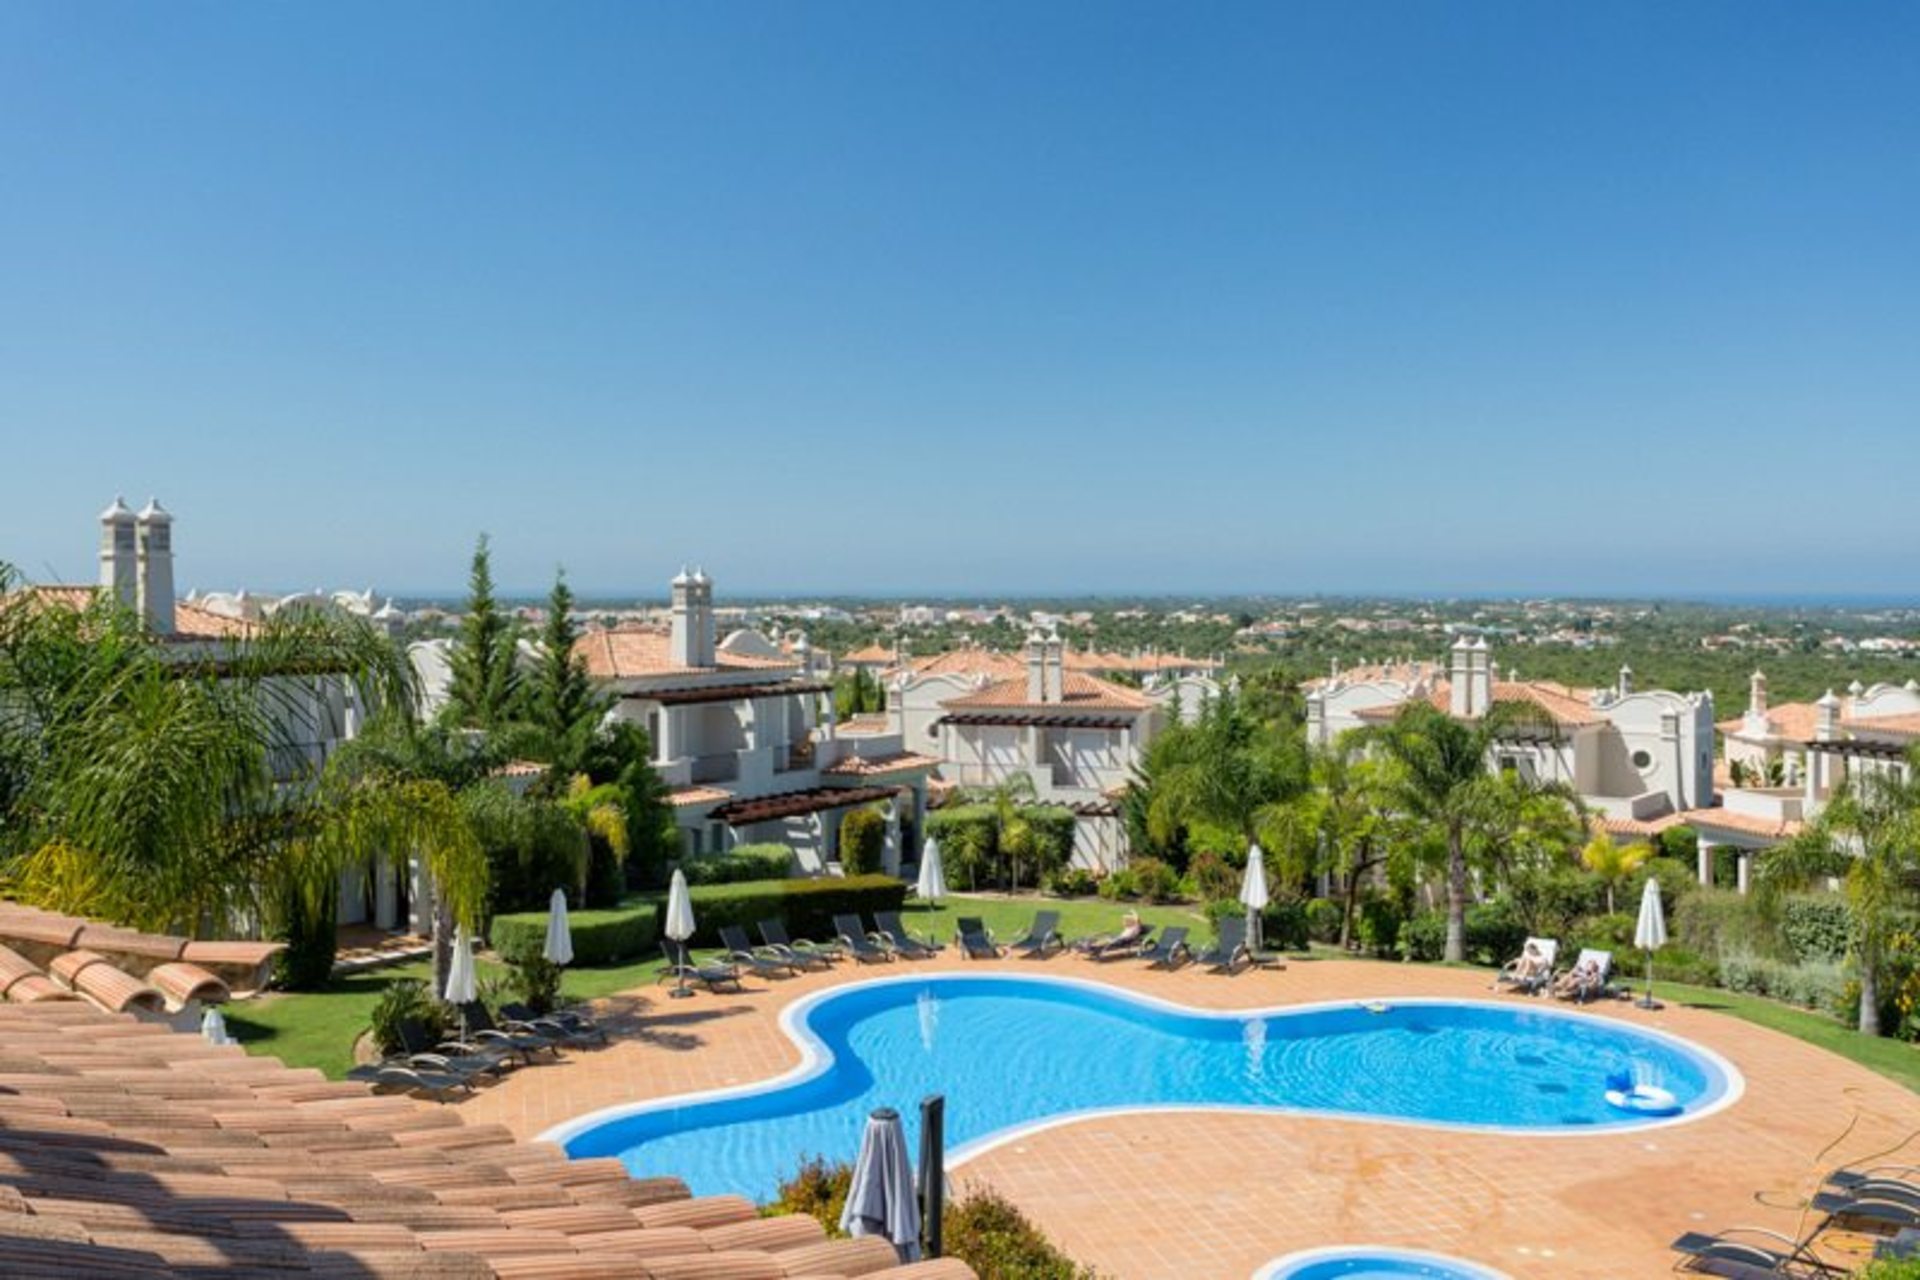 Terms and Condition - 5 Star Villa Holidays